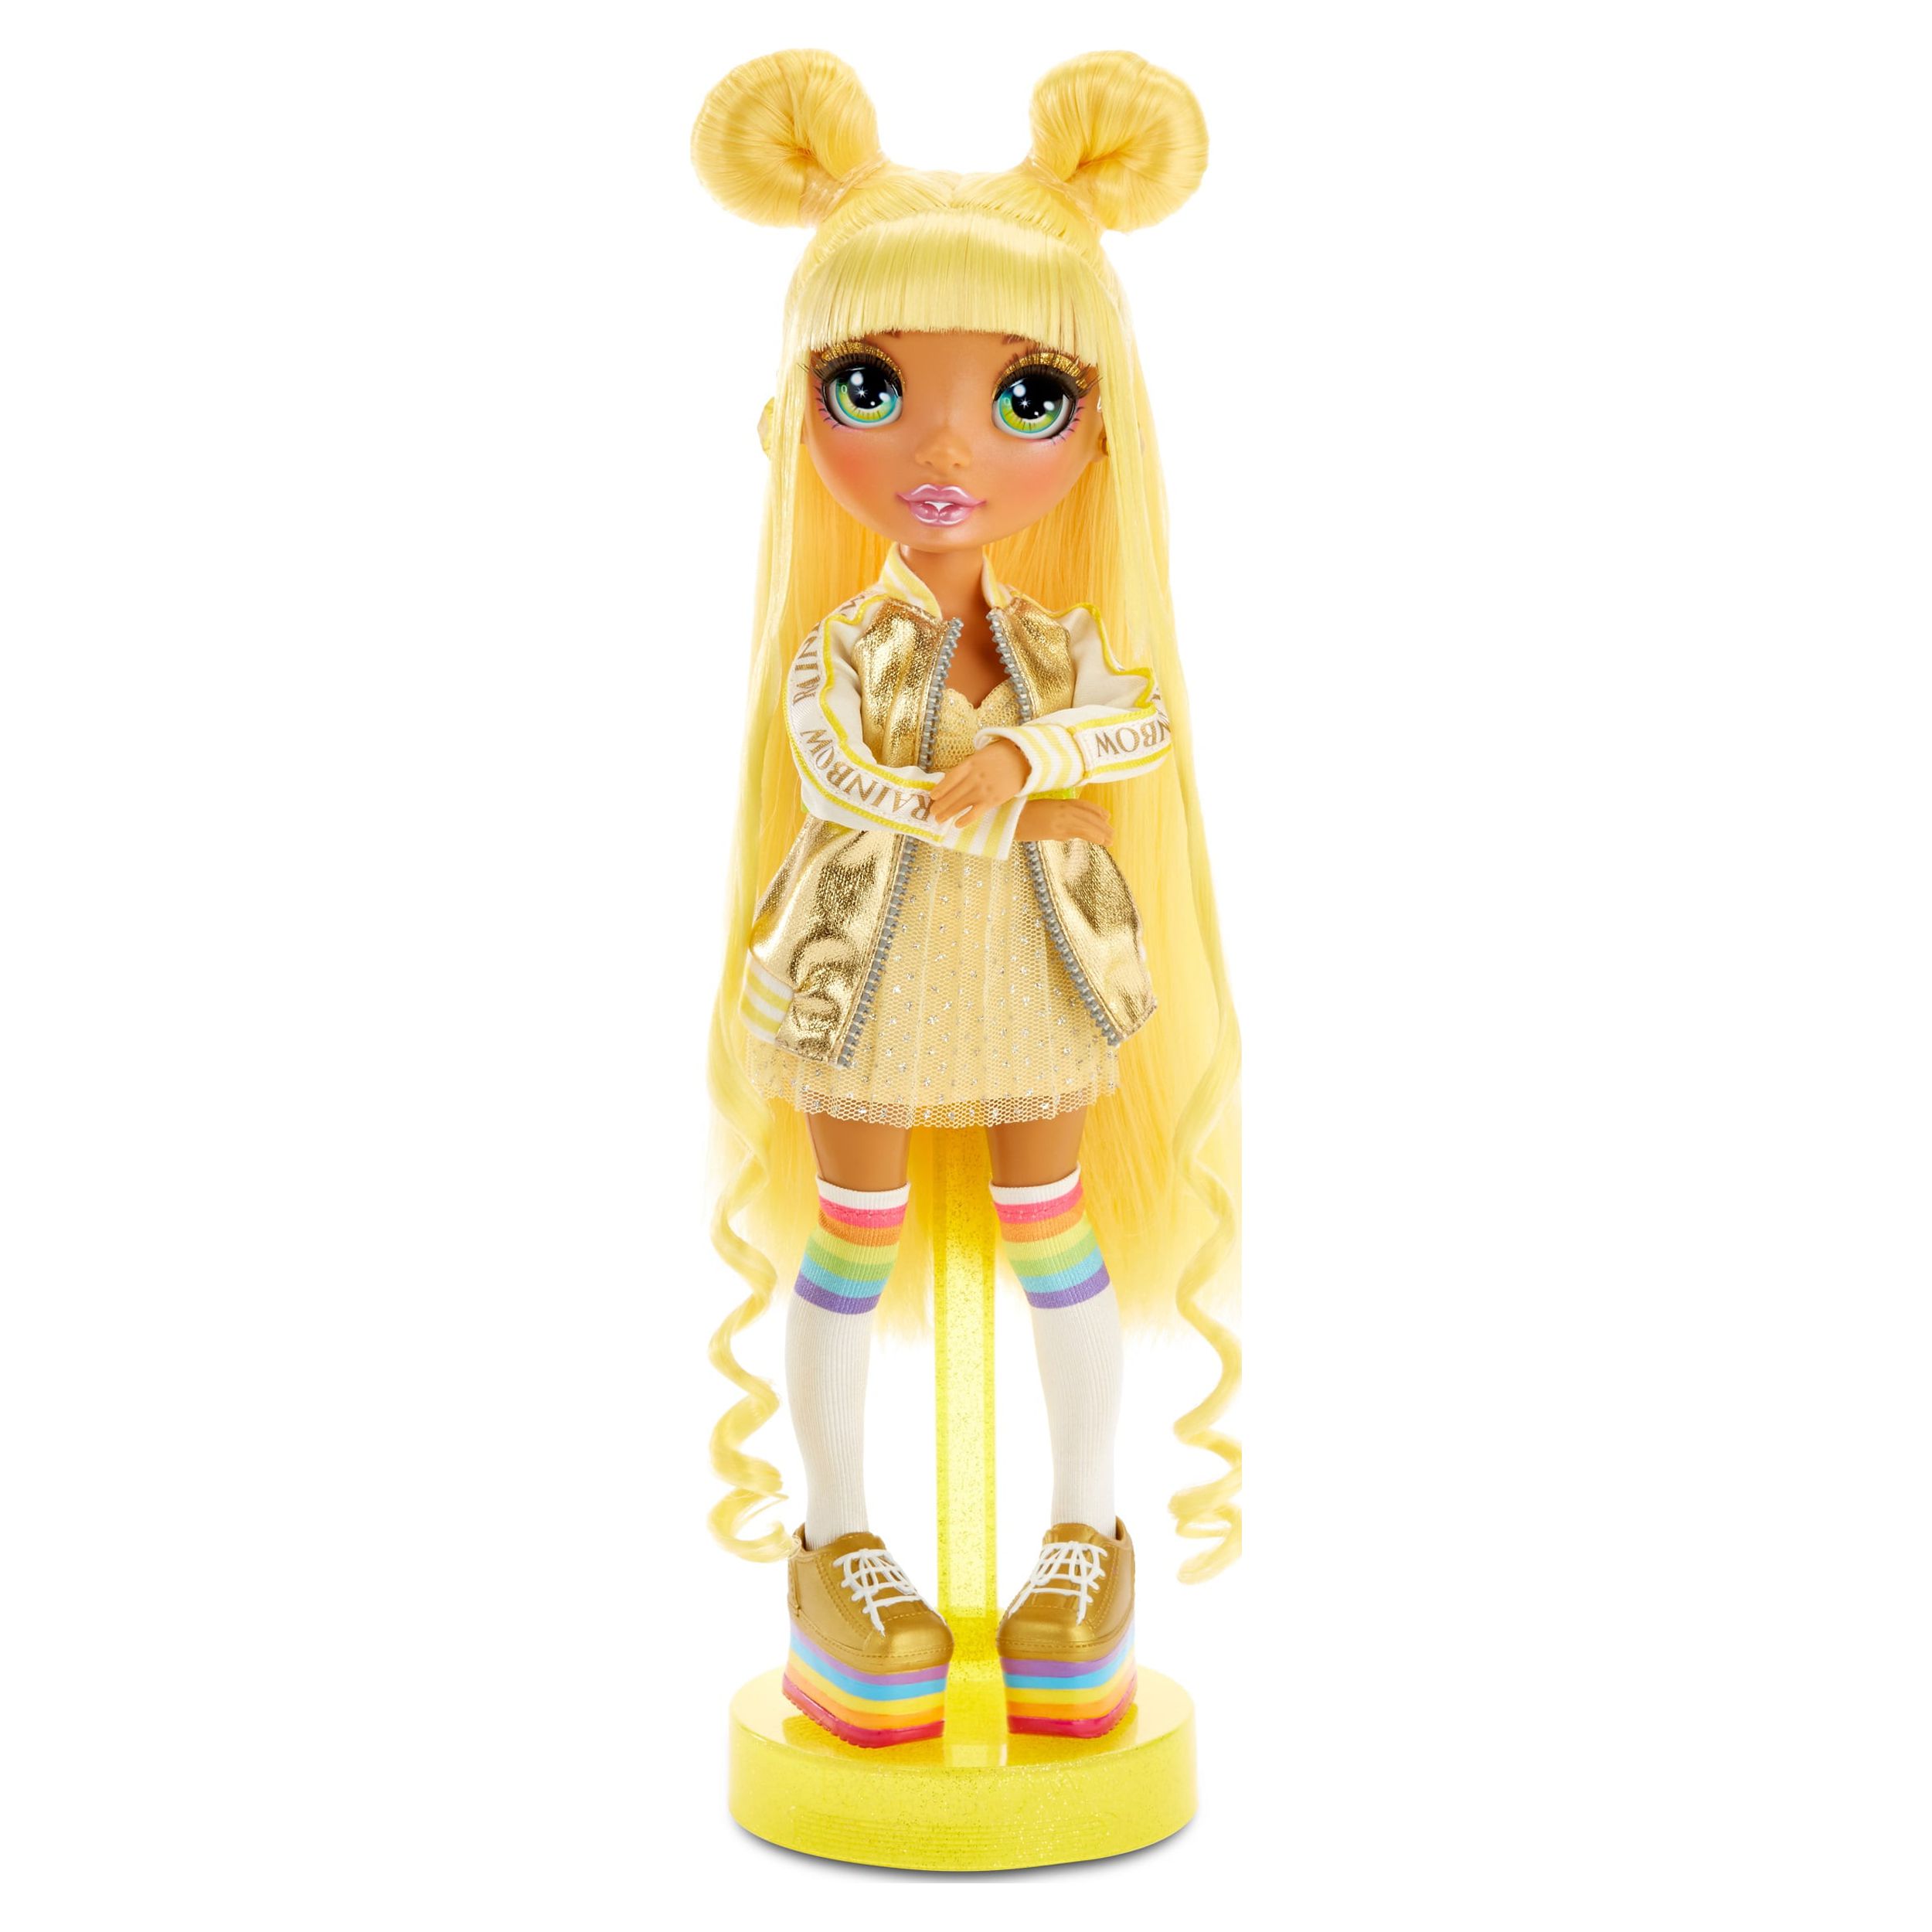 Rainbow High Sunny Madison – Yellow Fashion Doll with 2 Outfits - image 5 of 8